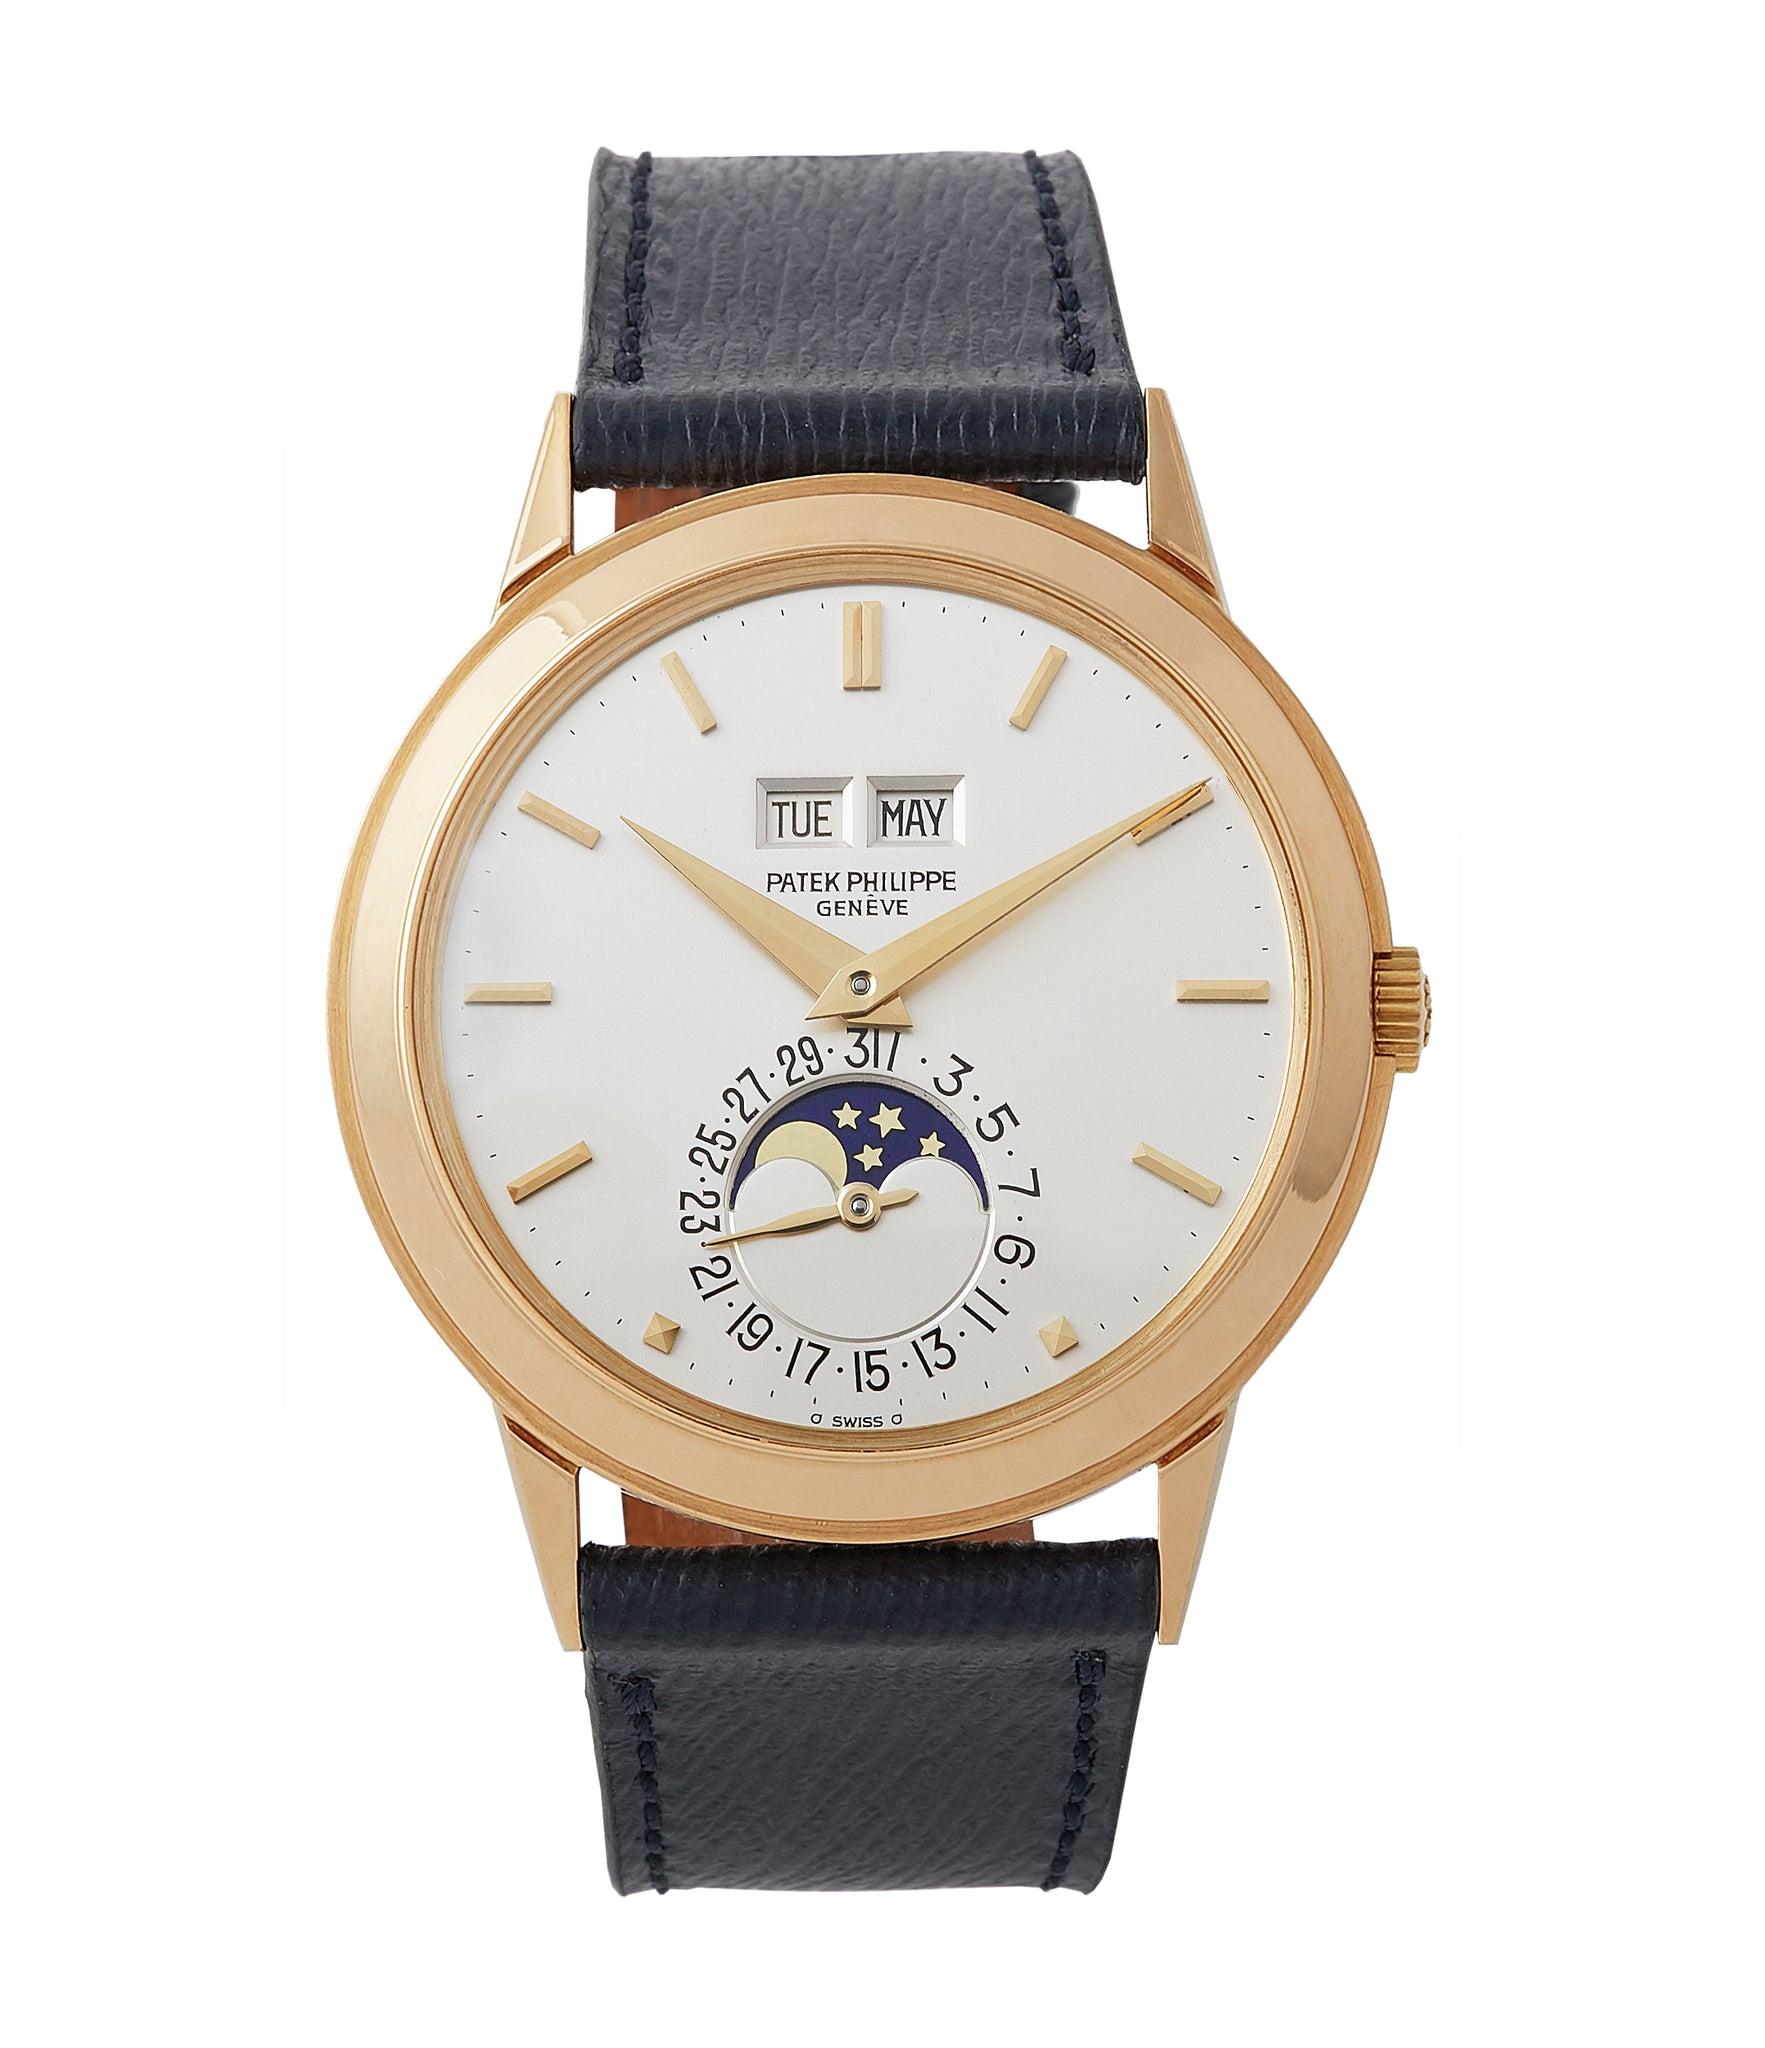 buy vintage Patek Philippe 3448 Perpetual Calendar Moonphase yellow gold dress watch for sale online at A Collected Man London UK specialist of rare watches